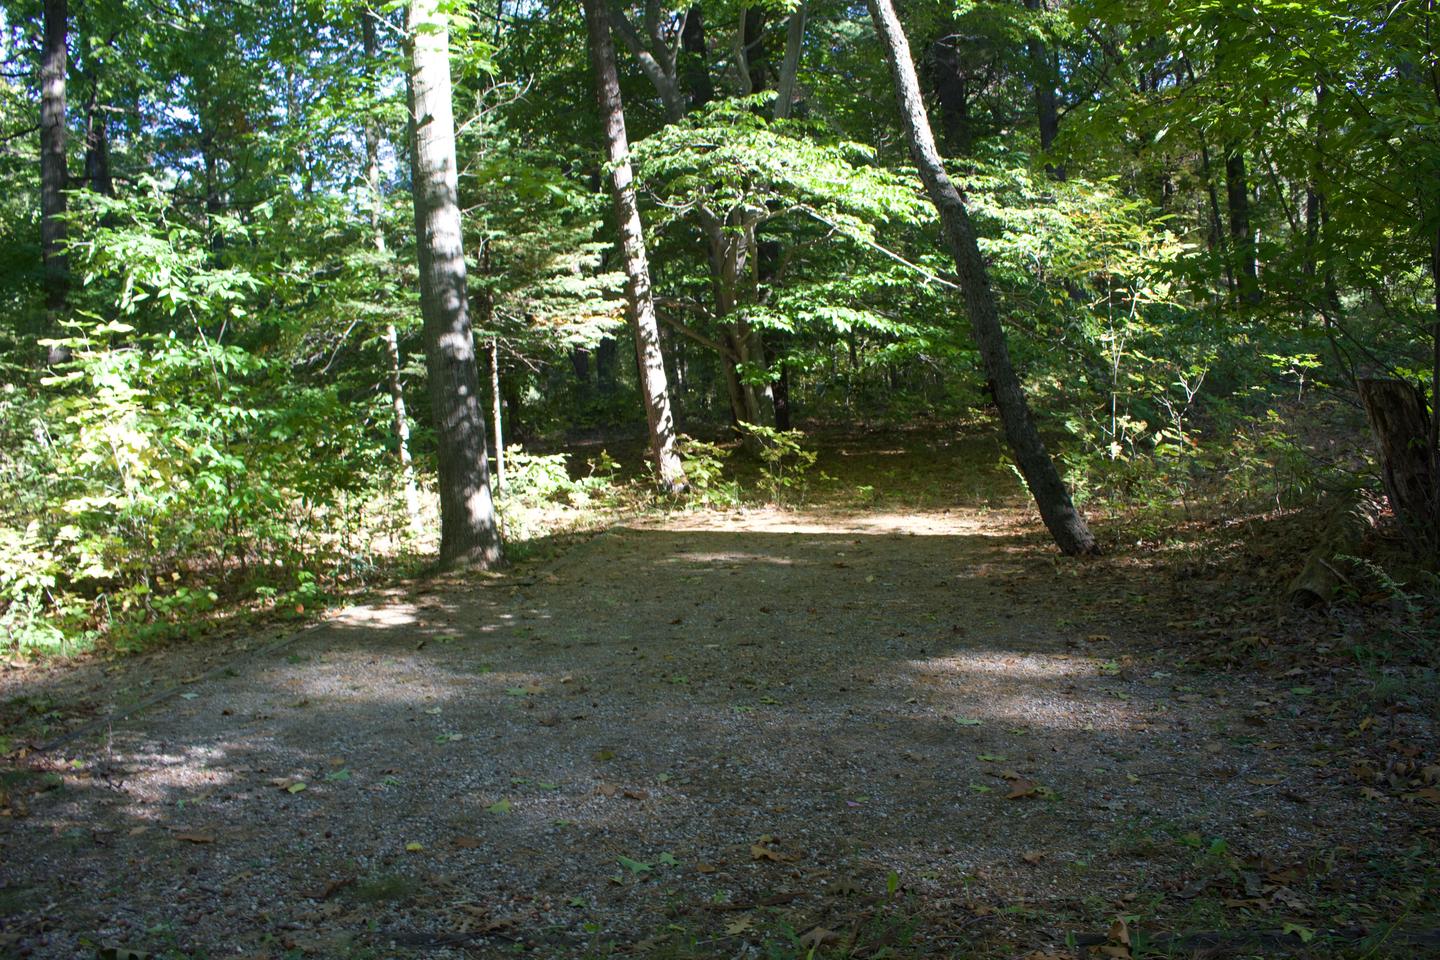 Campsite #89, view of the tent pad toward the road